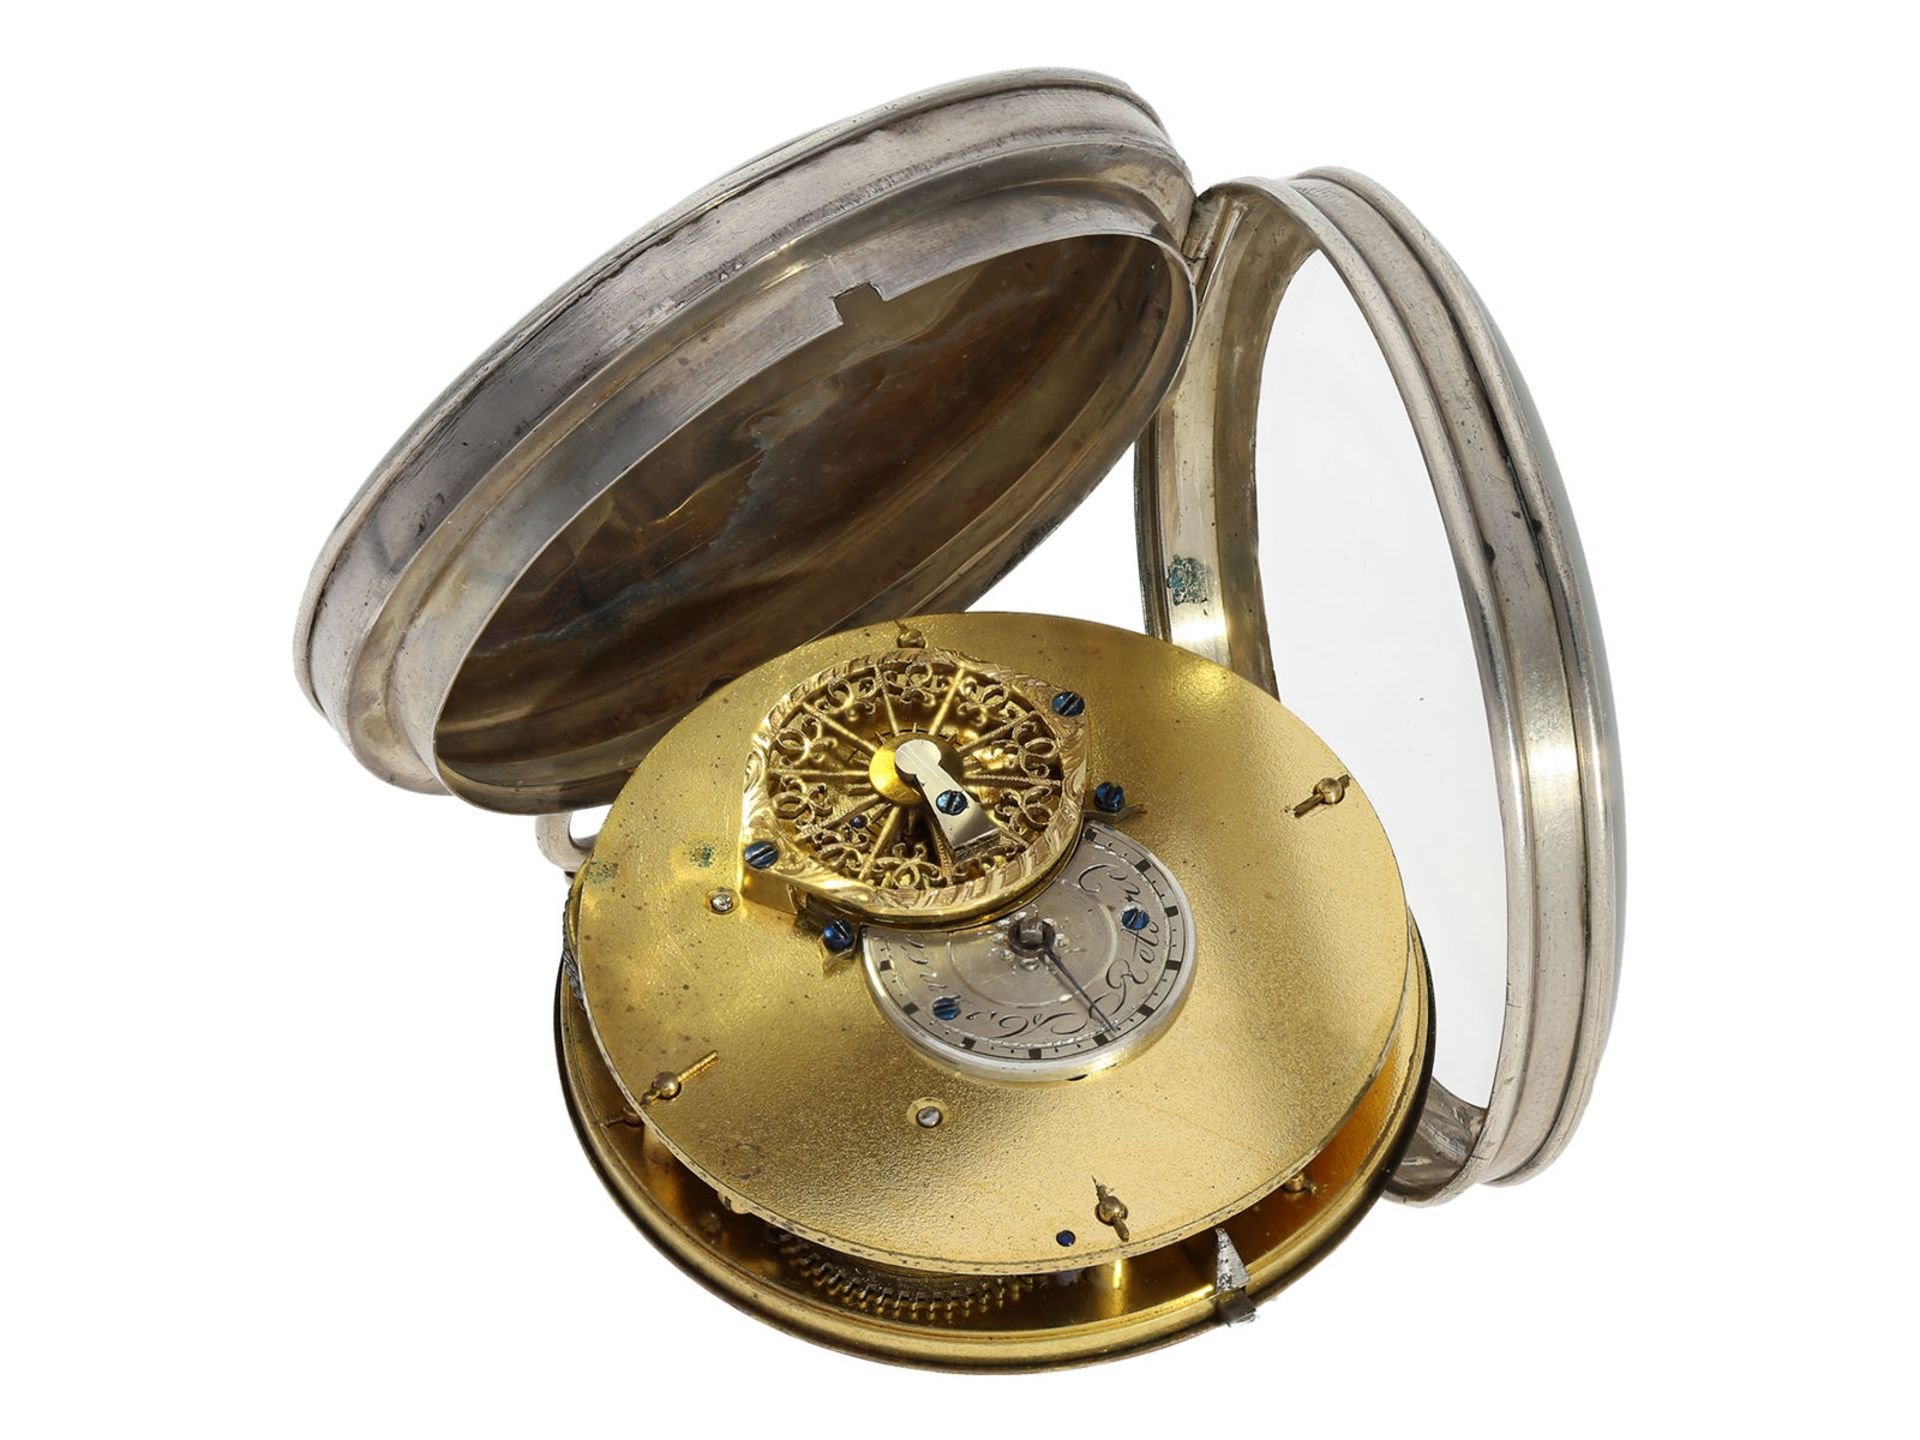 Pocket watch: rare verge watch with calendar and centre seconds, probably France around 1800 - Image 3 of 5